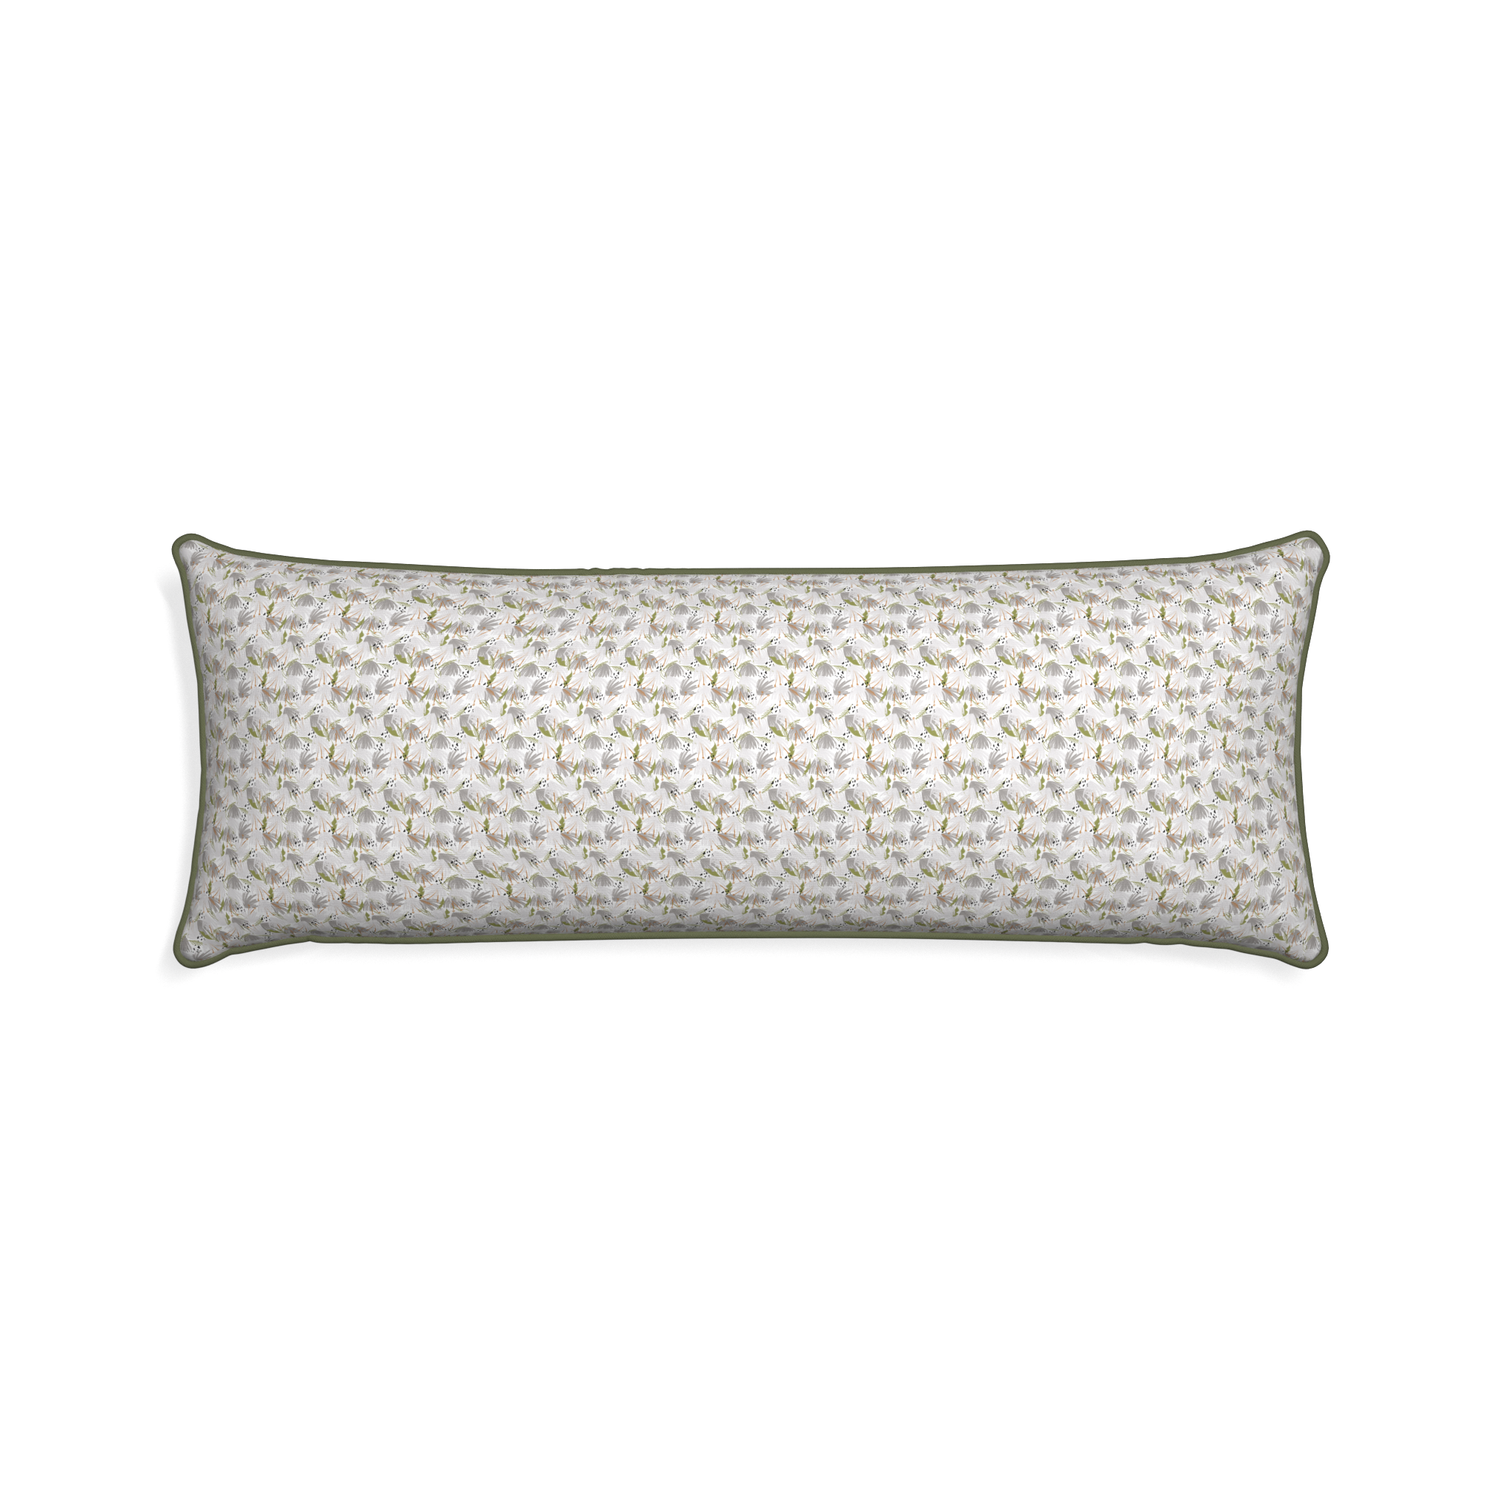 Xl-lumbar eden grey custom pillow with f piping on white background